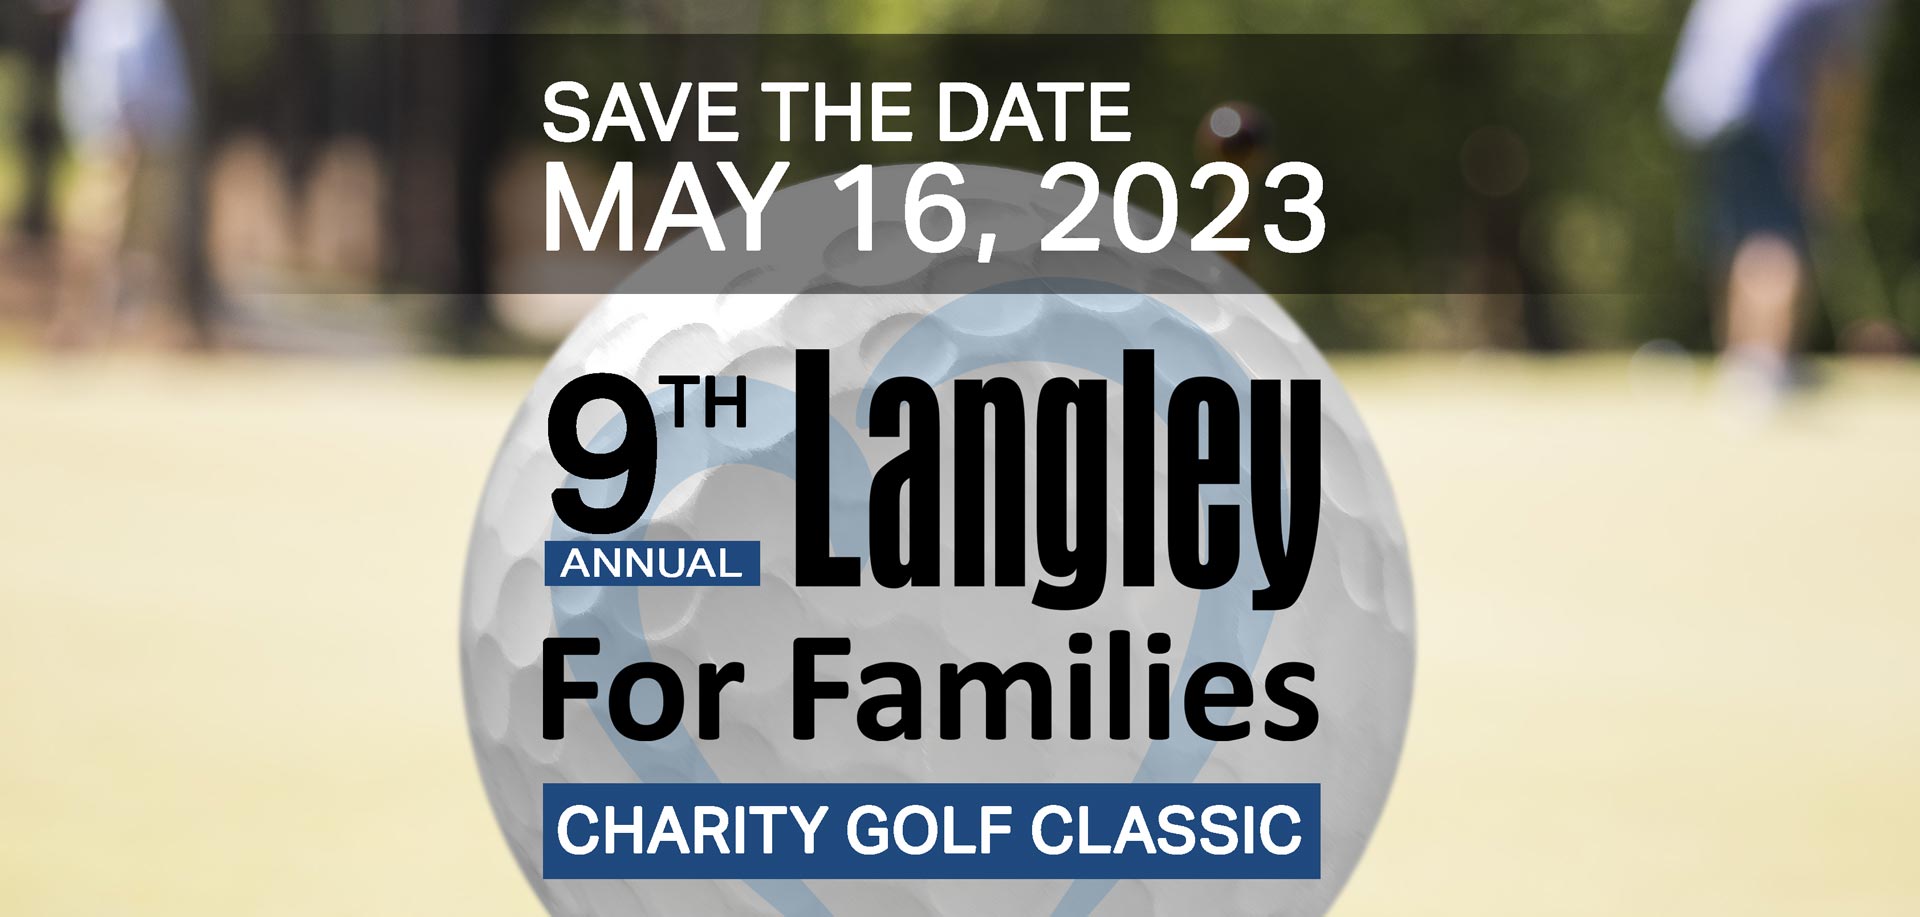 Save the Date - May 16, 2023. 9th Annual Langley for Families Charity Golf Classic